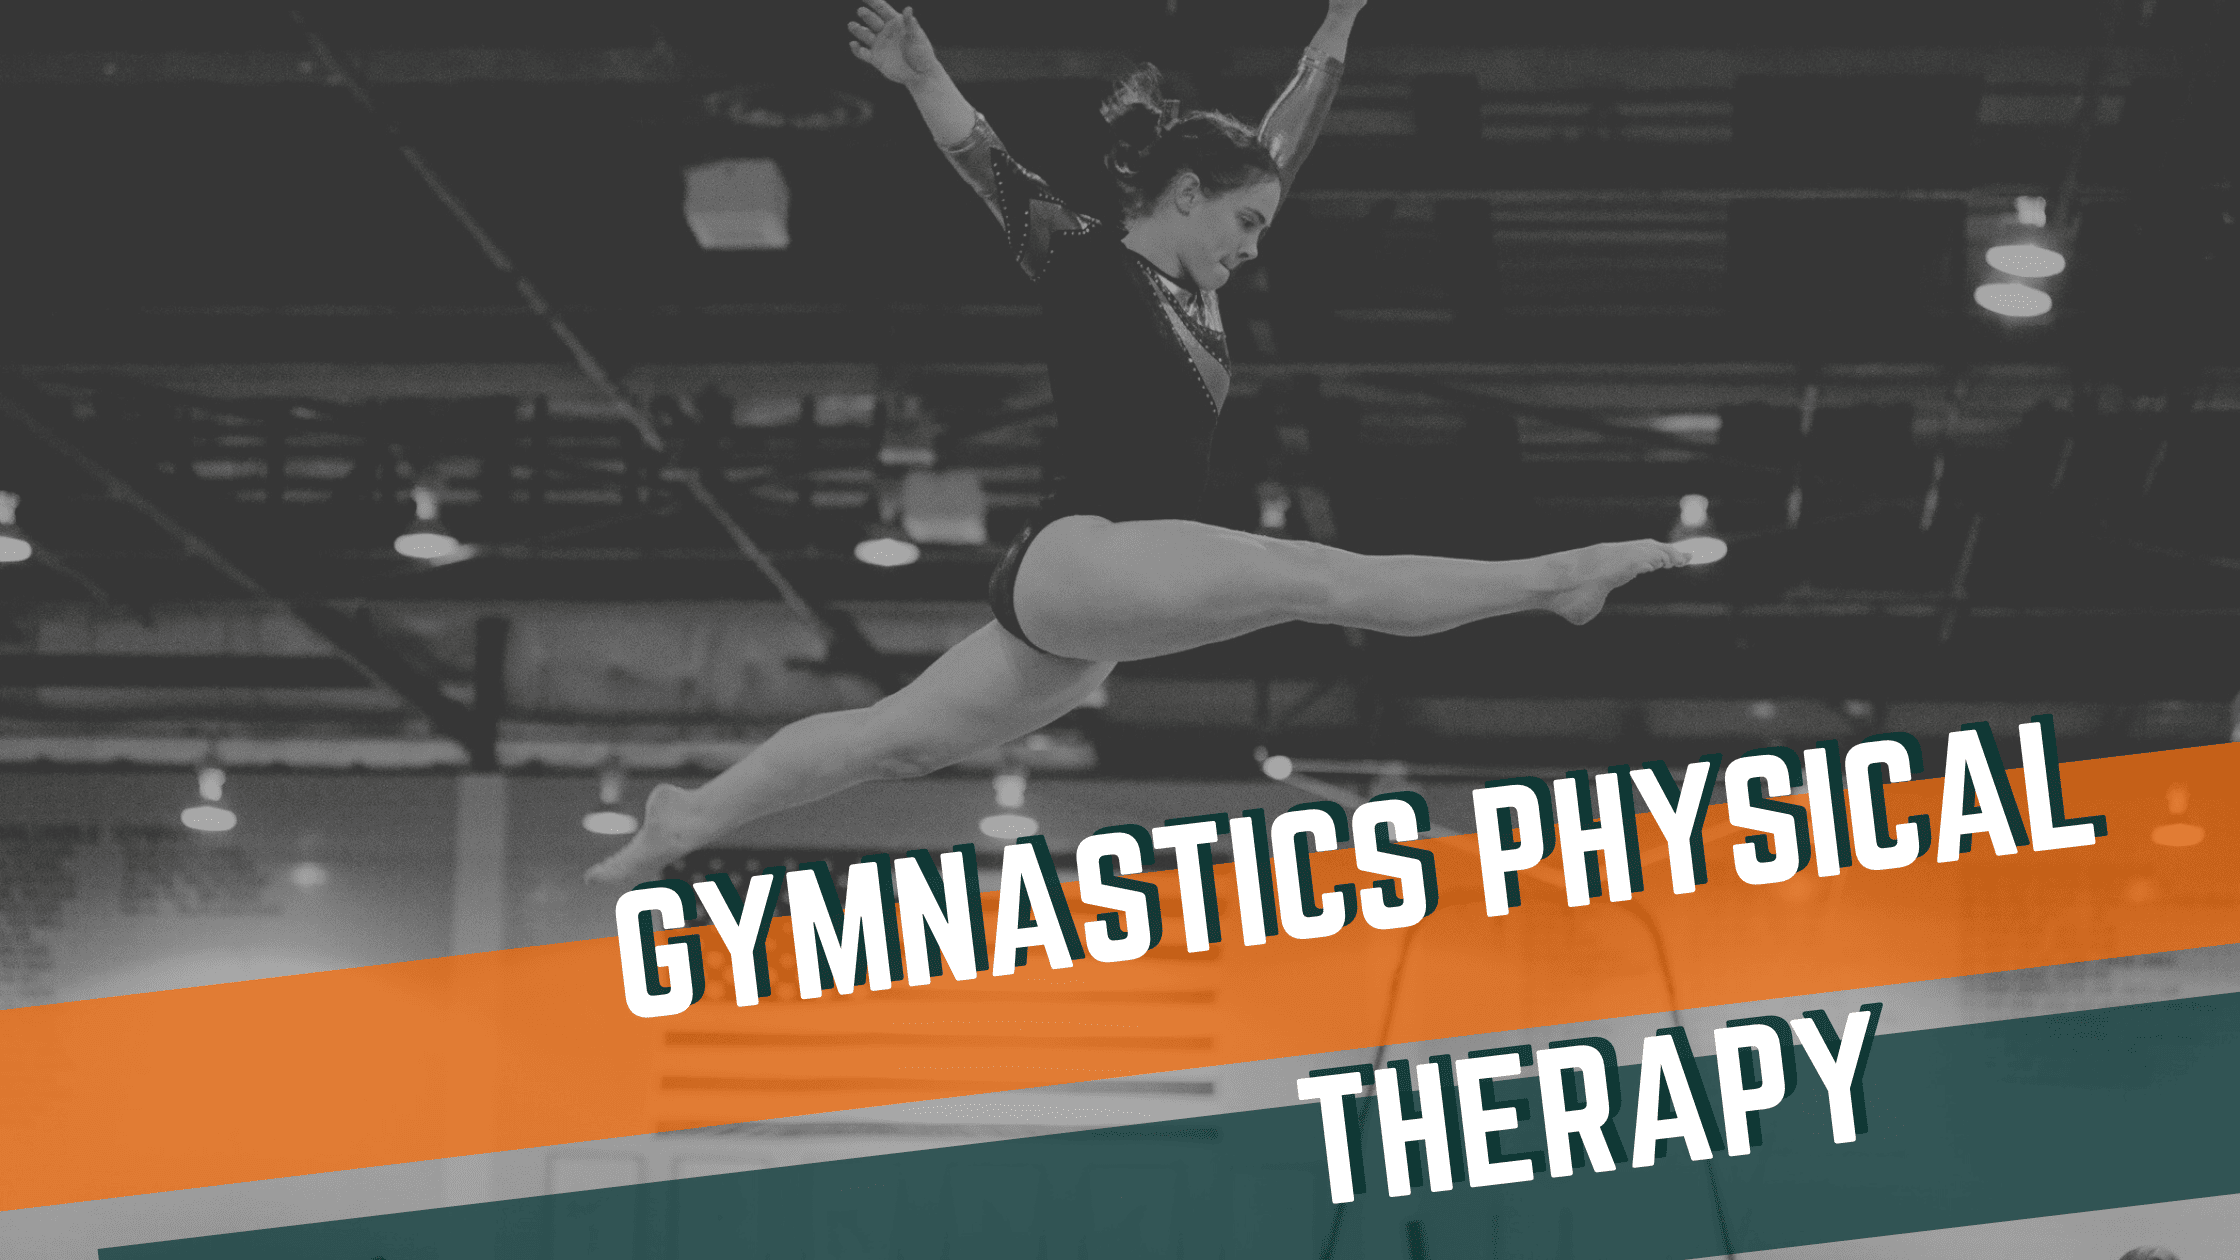 Gymnastics Physical Therapy